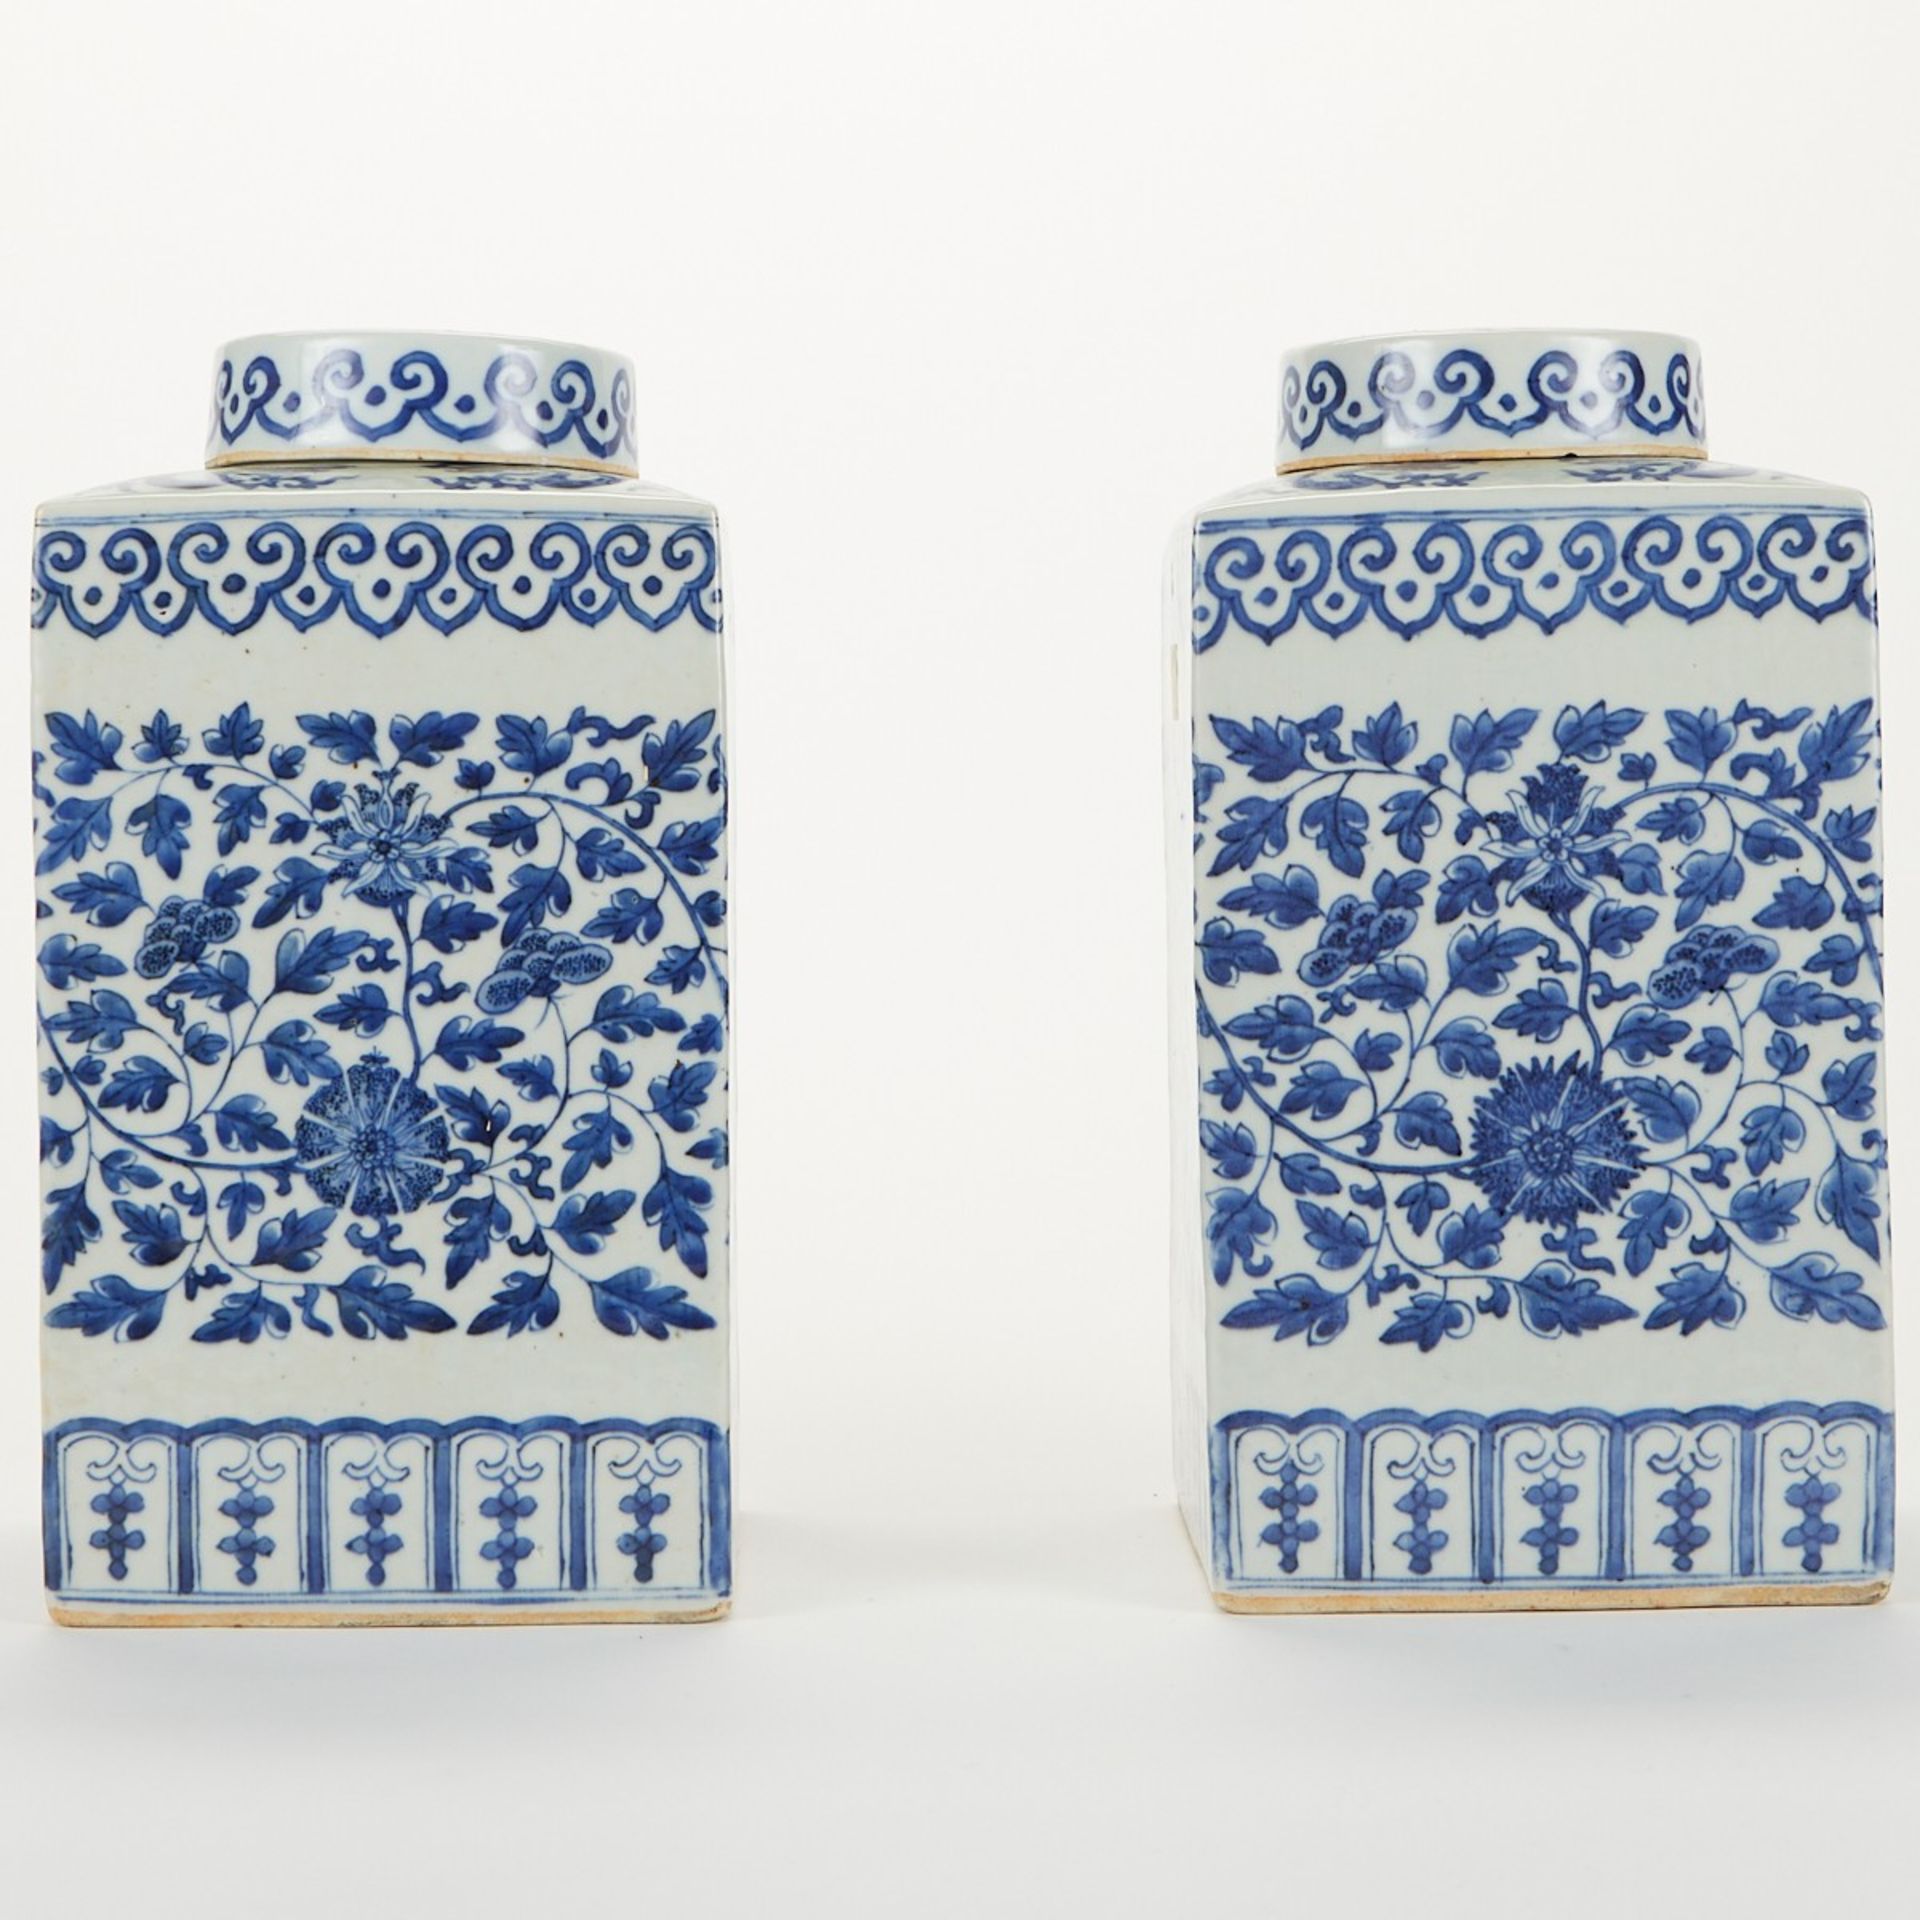 Pair of Chinese Export Blue & White Porcelain Ginger Jars - Image 5 of 9